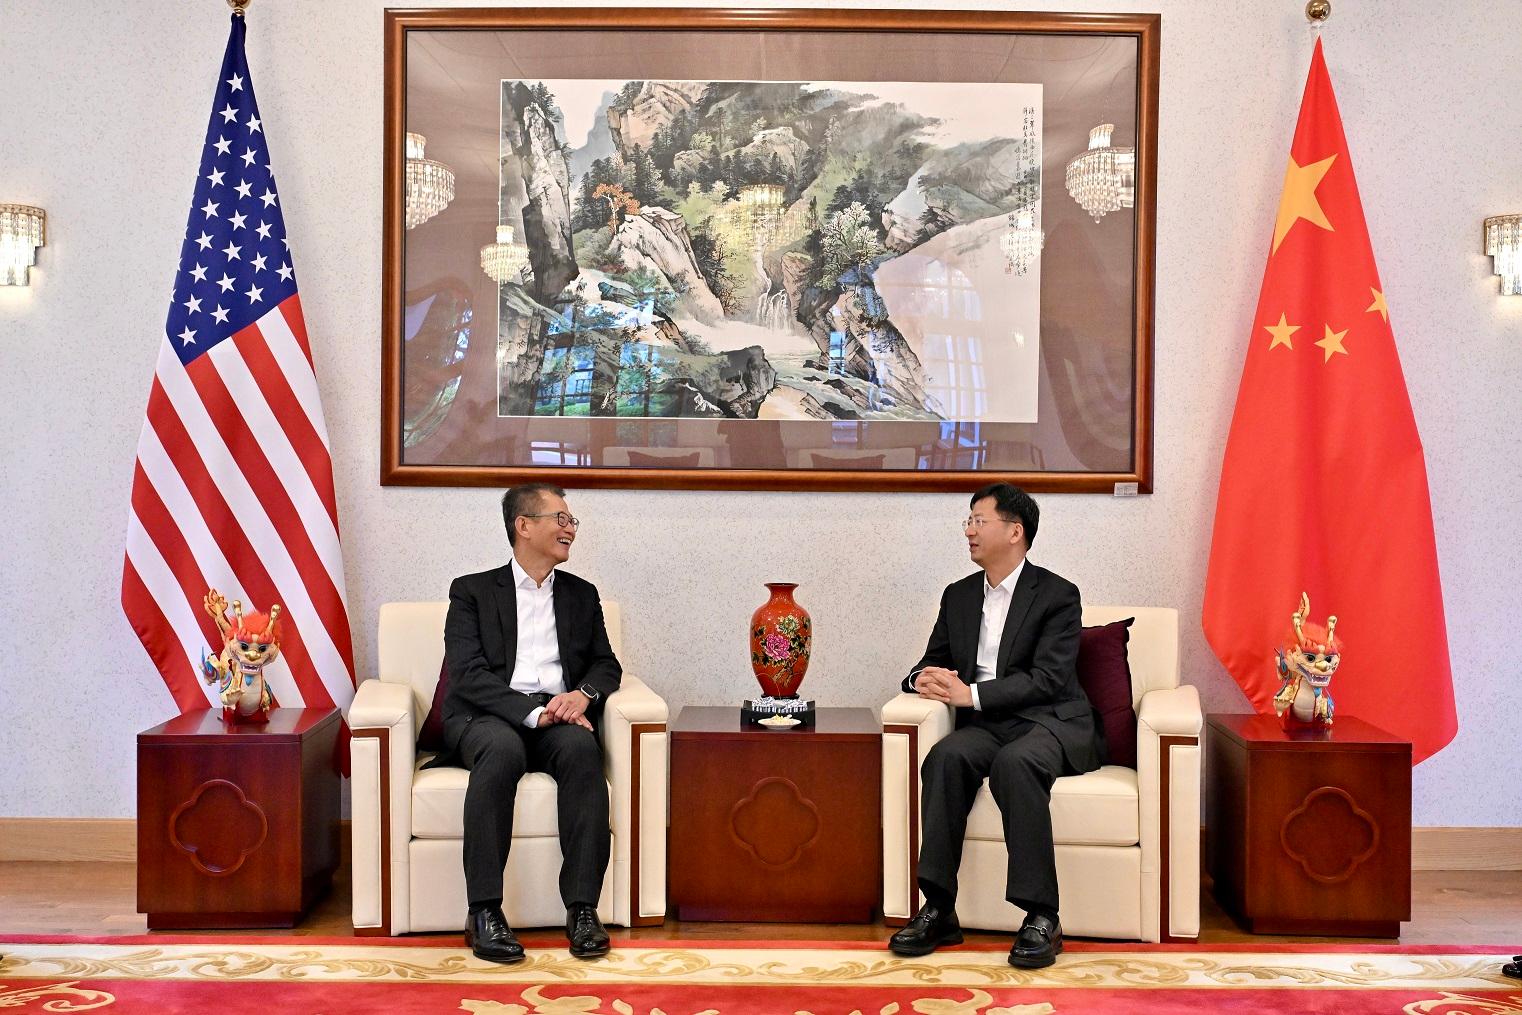 The Financial Secretary, Mr Paul Chan, arrived in San Francisco, the United States, on May 27 (San Francisco time) and met with the Consul General of China in San Francisco, Mr Zhang Jianmin. Photo shows Mr Chan (left) meeting with Mr Zhang (right).